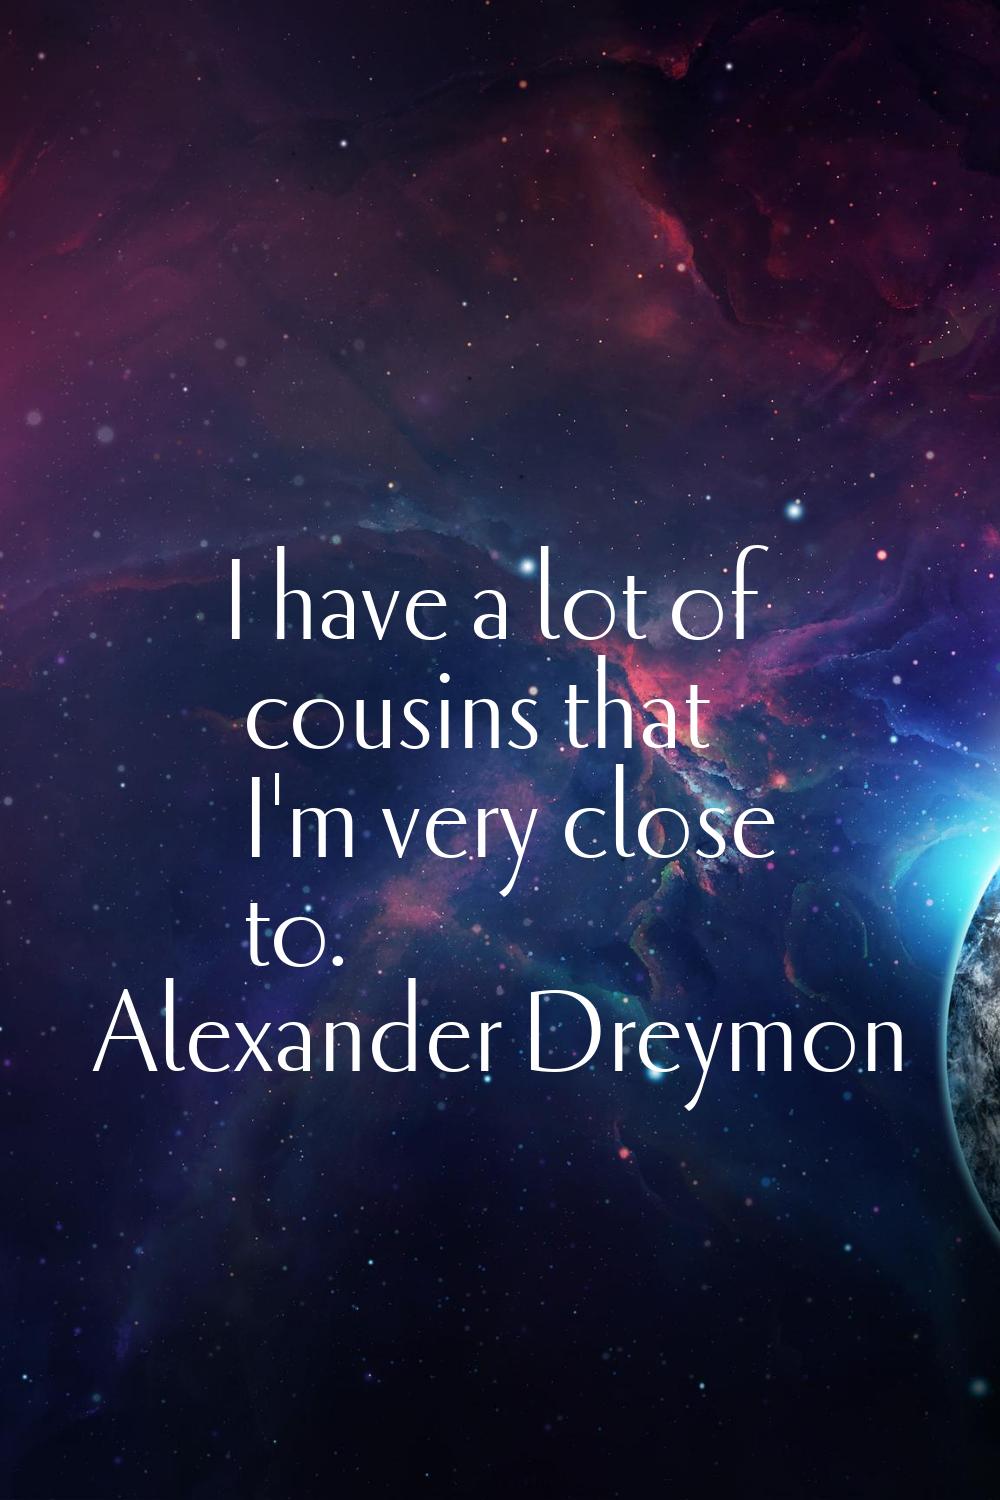 I have a lot of cousins that I'm very close to.